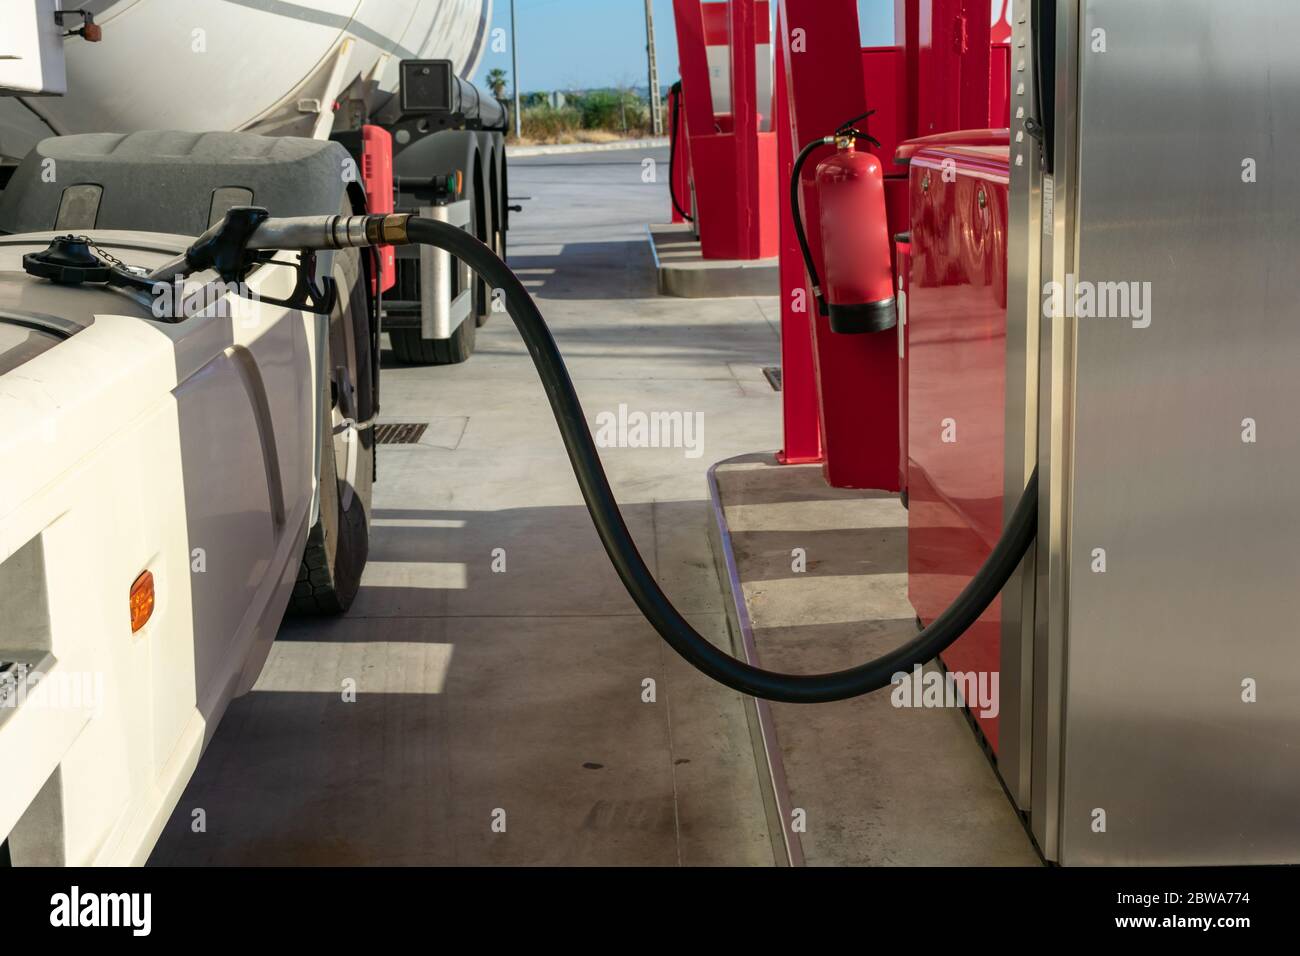 https://c8.alamy.com/comp/2BWA774/tank-truck-refueling-at-a-service-station-with-the-nozzle-placed-in-the-fuel-tank-2BWA774.jpg